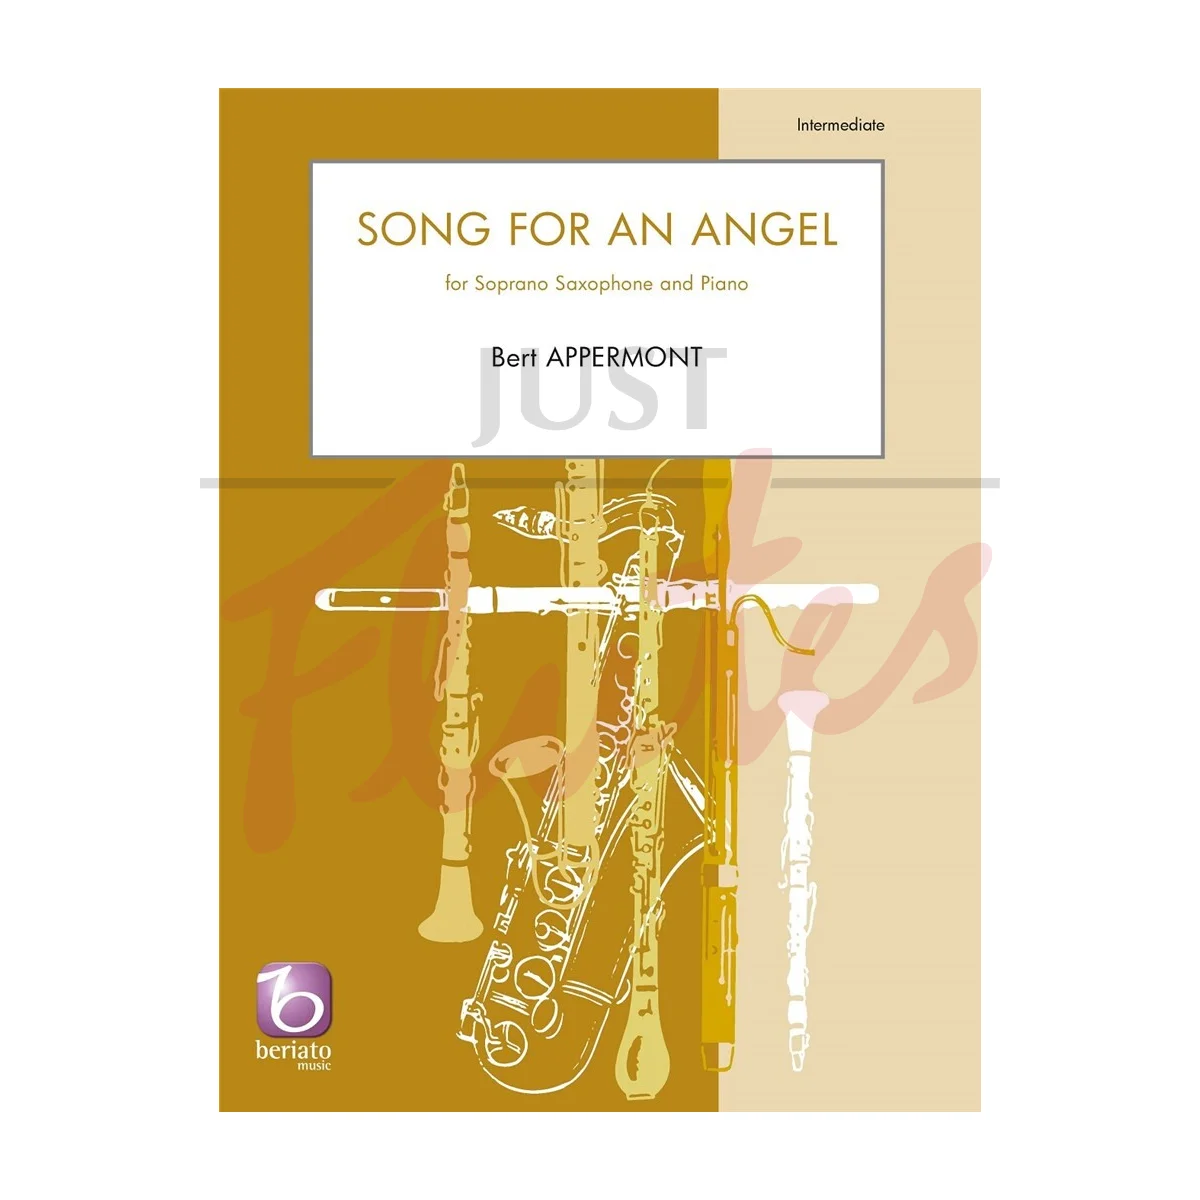 Song for an Angel for Soprano Saxophone and Piano